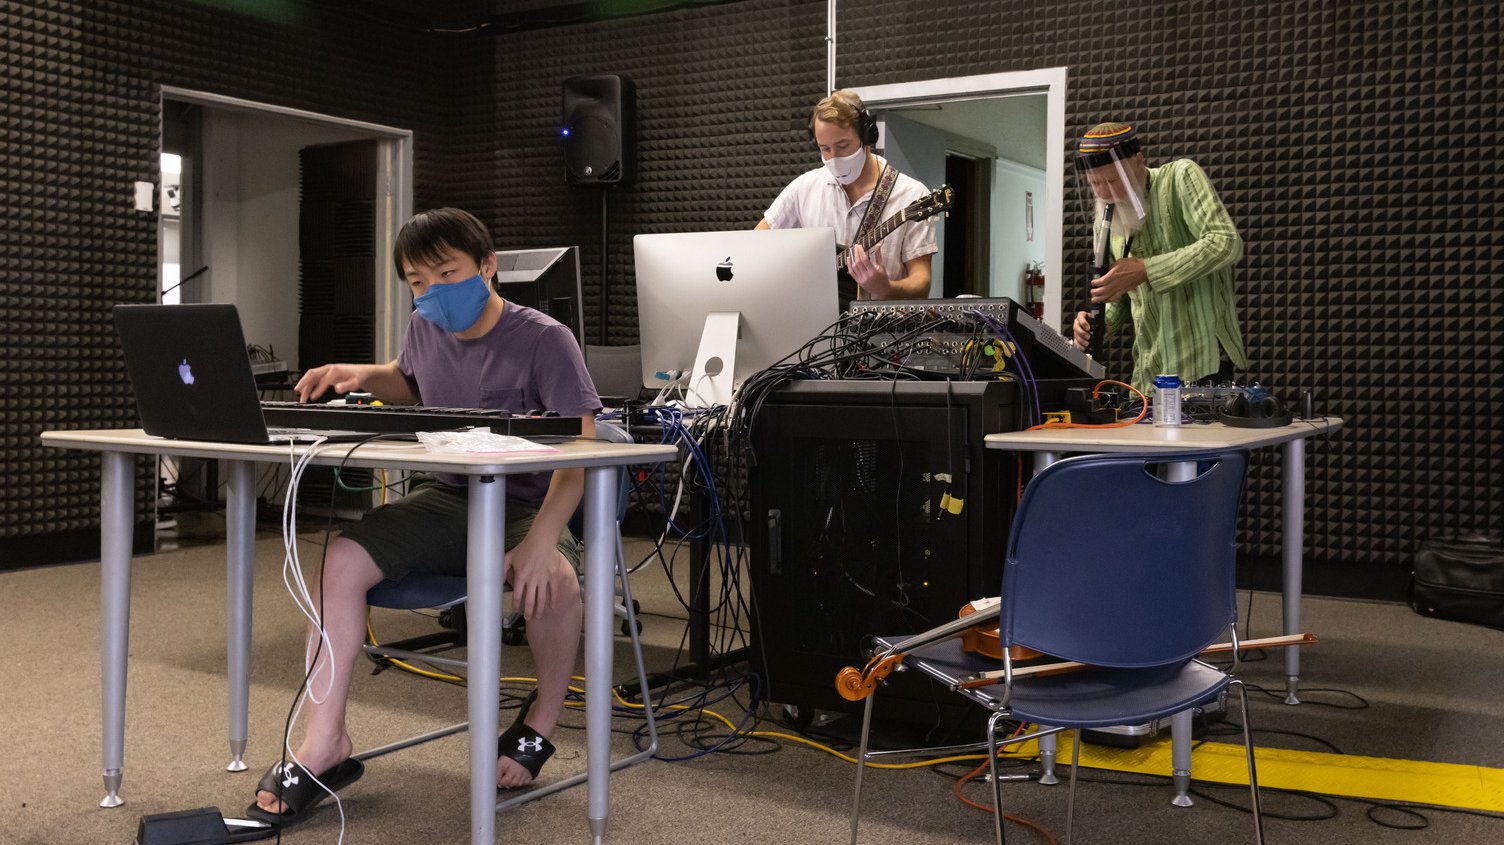 The Sound Art Collaborative, led by Professor Dwight Frizzell, hones their improv skills. Each student brings their own musical skill using traditional instruments, foley sound and spoken word to create an otherworldly soundscape.